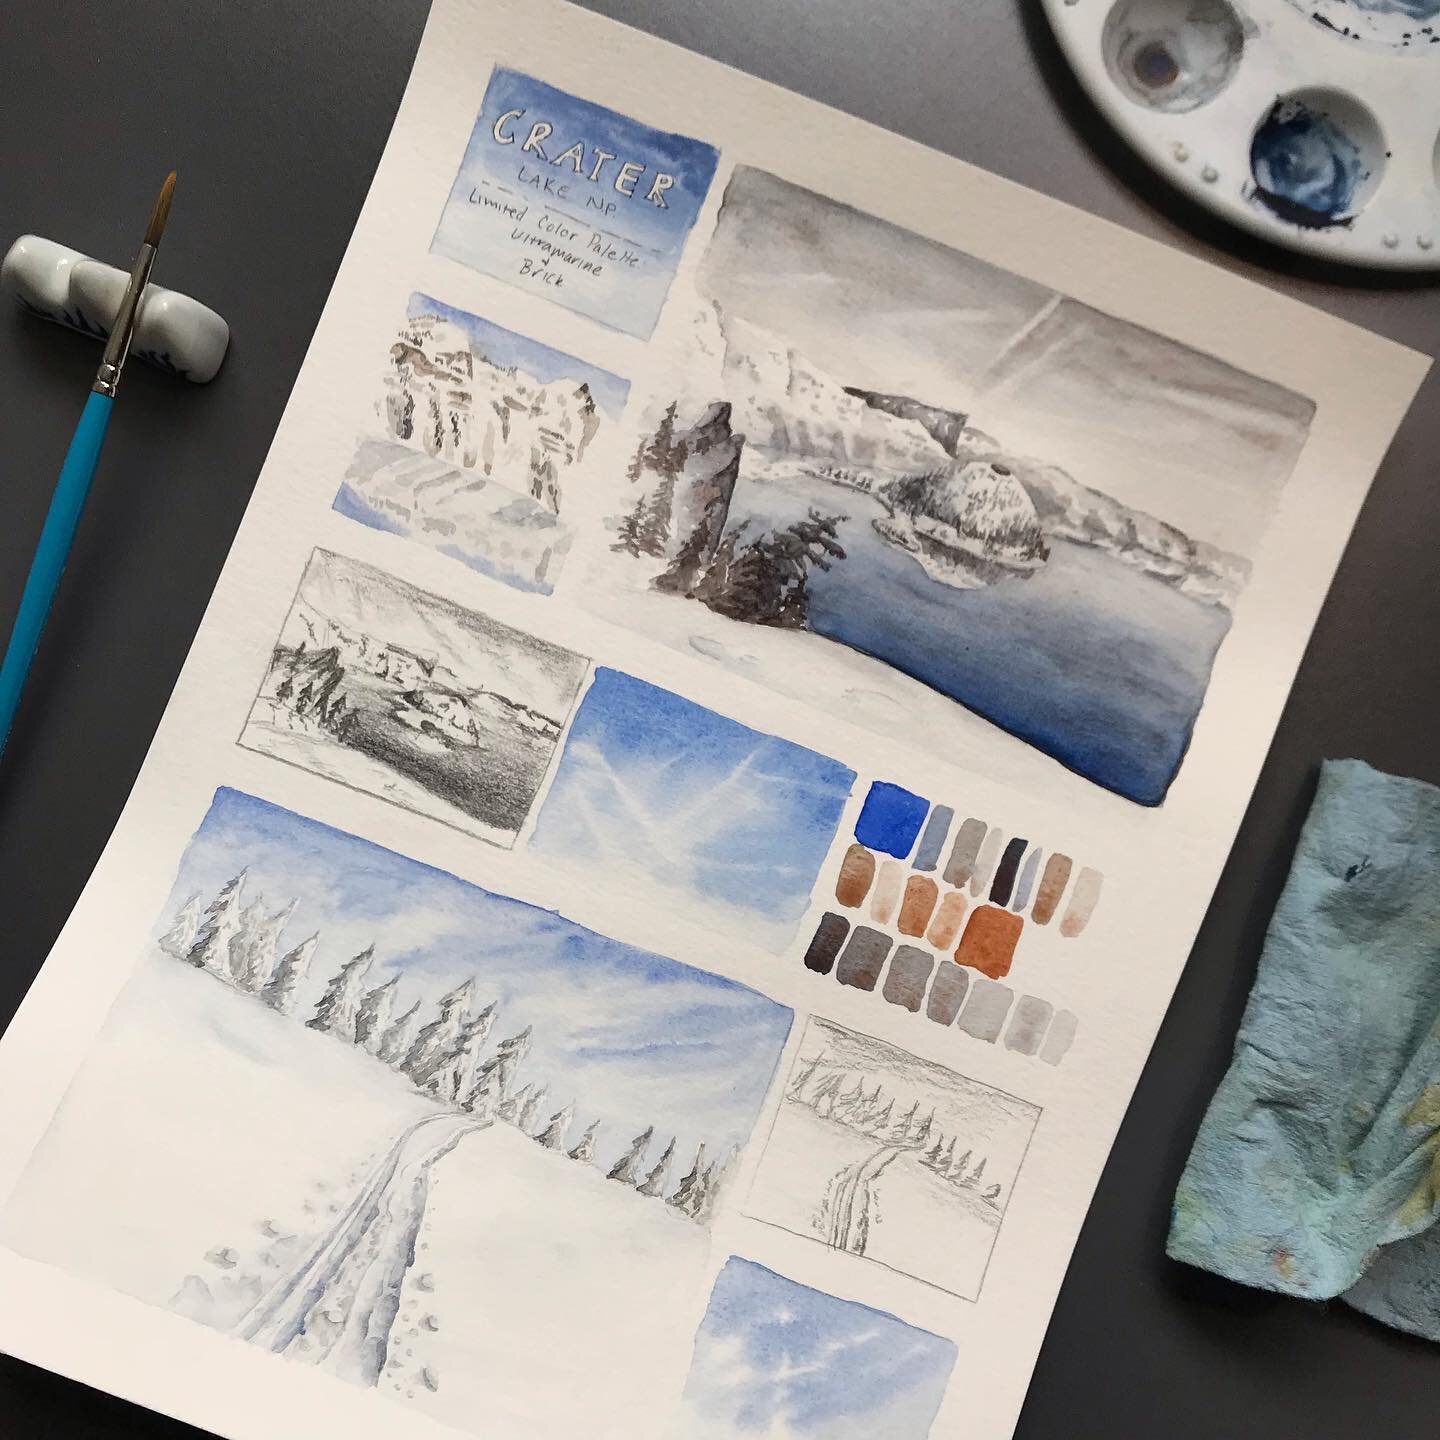 Watercolor studies from a snowy @craterlakenps. I love to work with a limited color palette. These snowy scenes were great for using my hand mulled ultramarine and brick watercolor paints.

#watercolors #watercolorpainting #landscapepainting #iloveth